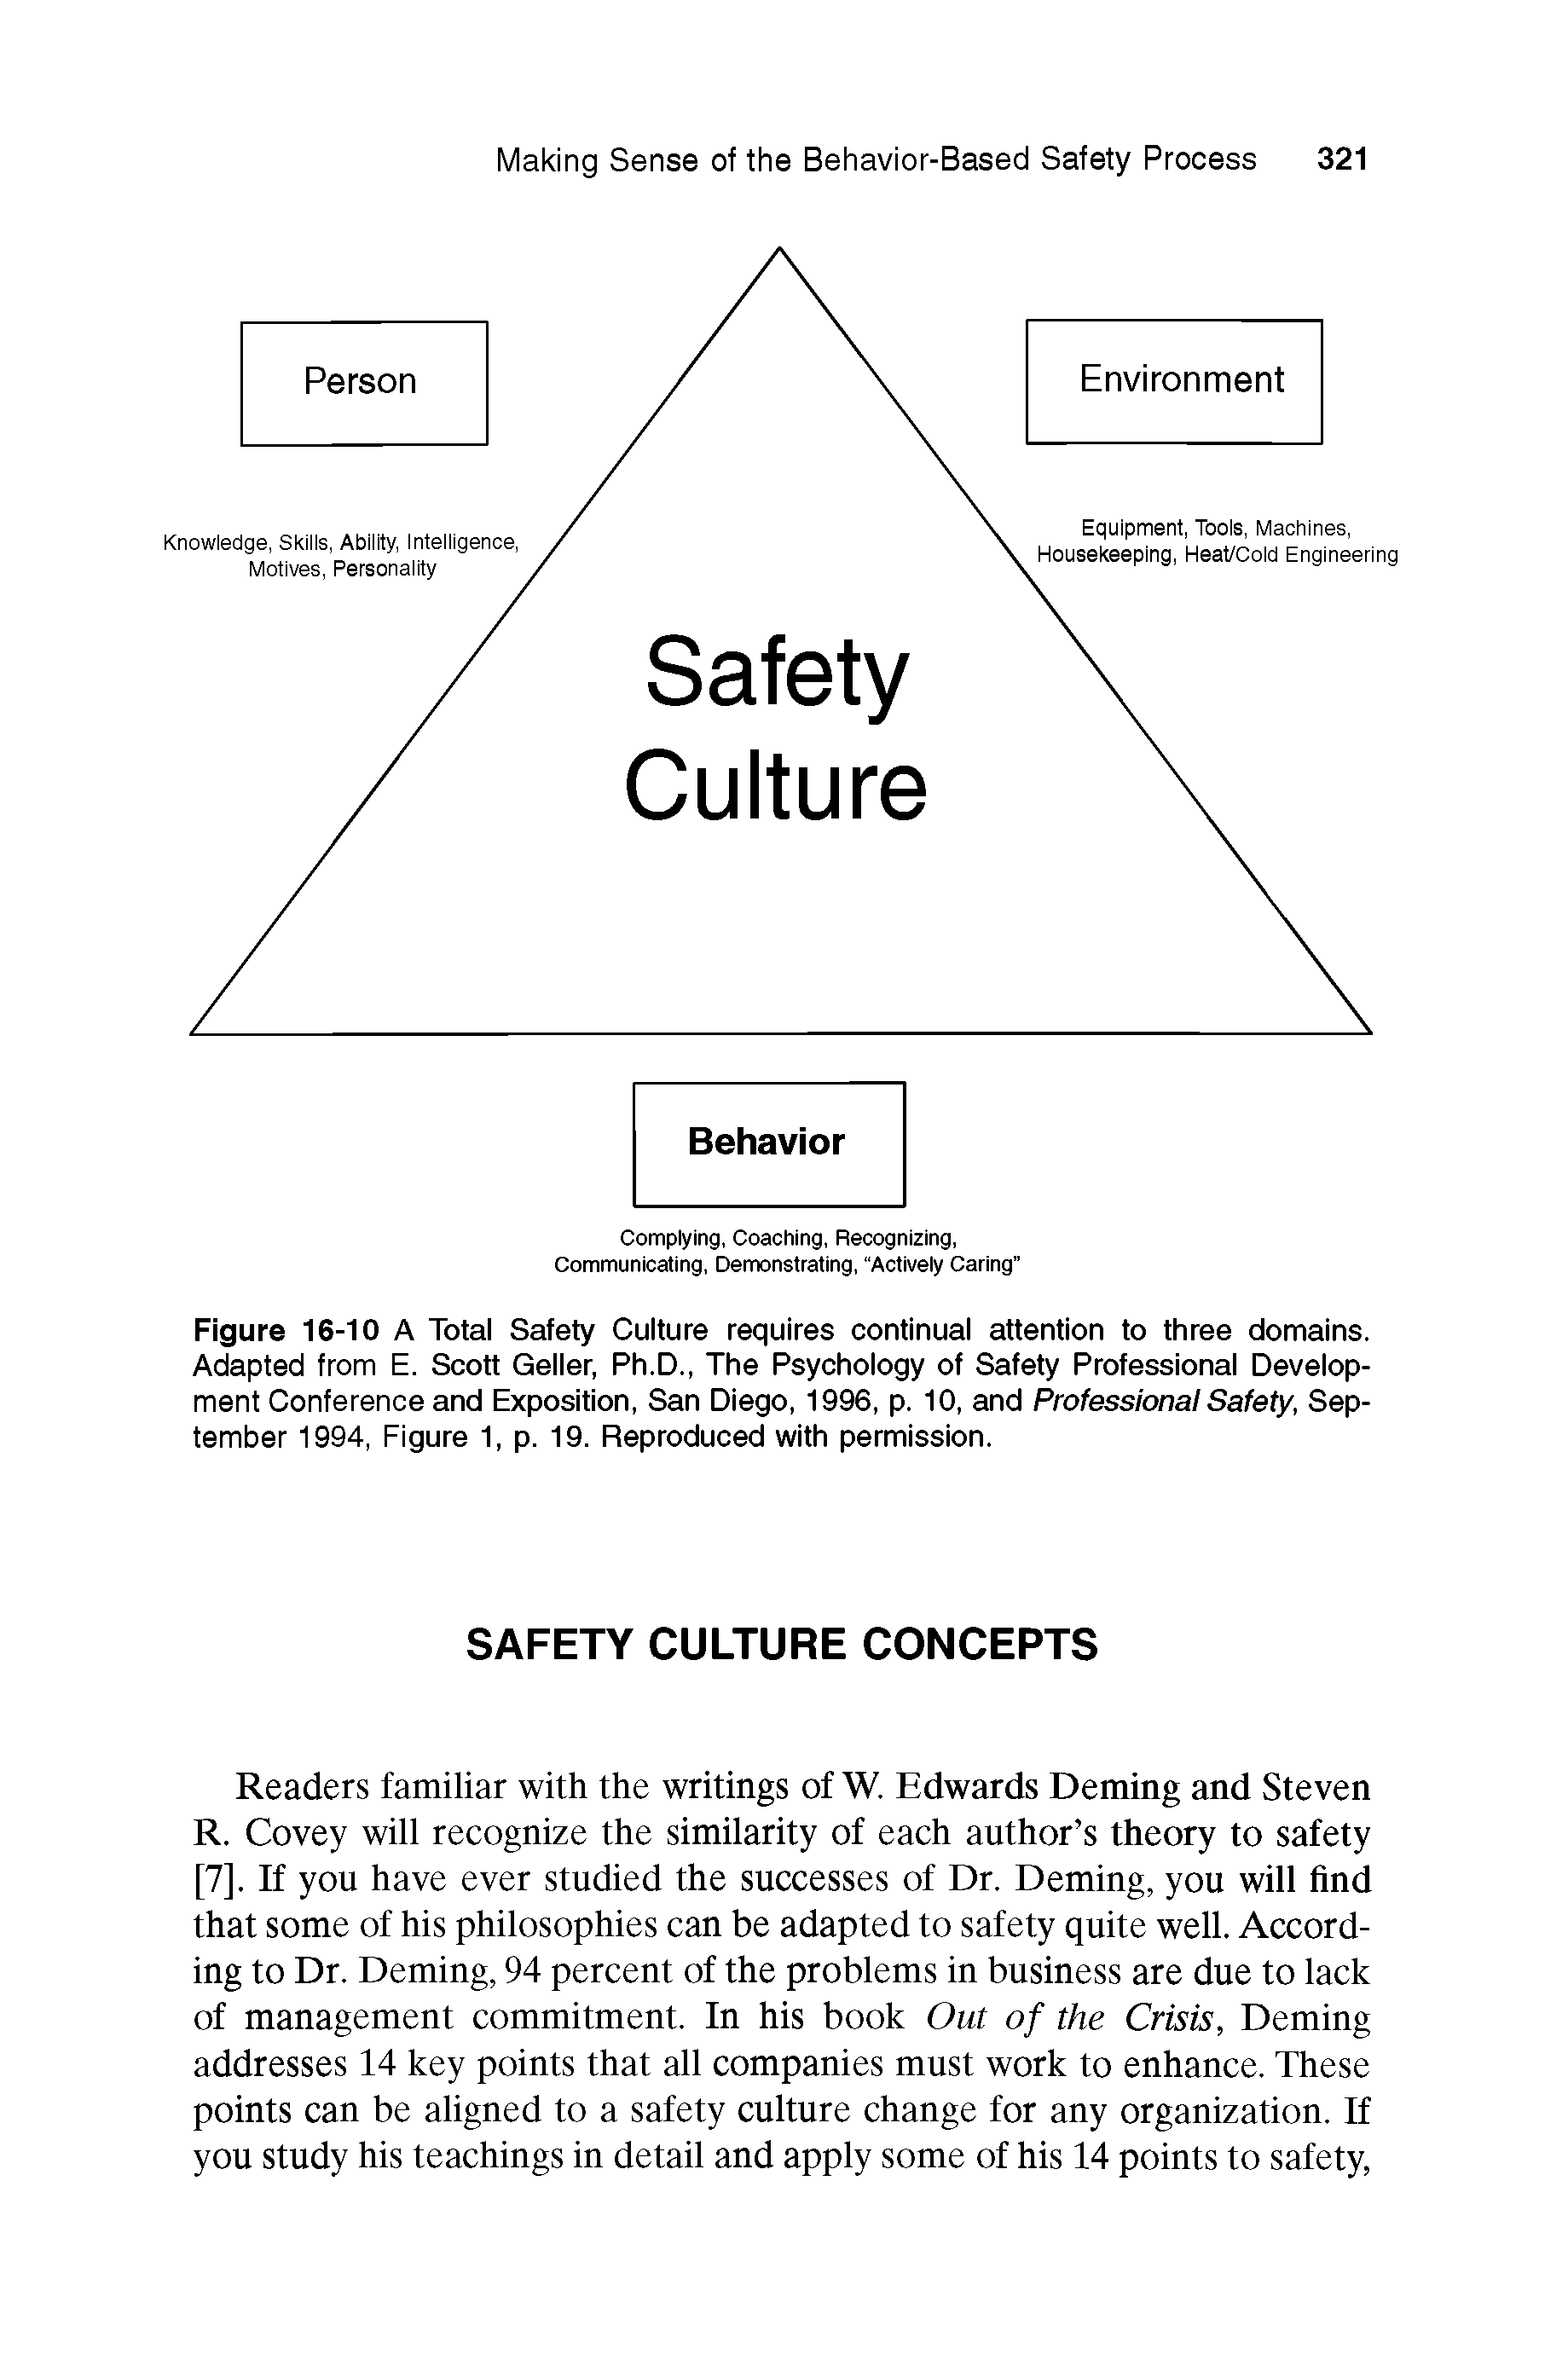 Figure 16-10 A Totai Safety Culture requires continual attention to three domains. Adapted from E, Scott Geller, Ph,D The Psychology of Safety Professional Development Conference and Exposition, San Diego. 1996, p, 10. and Professional Safety, September 1994, Figure 1, p. 19. Reproduced with permission.